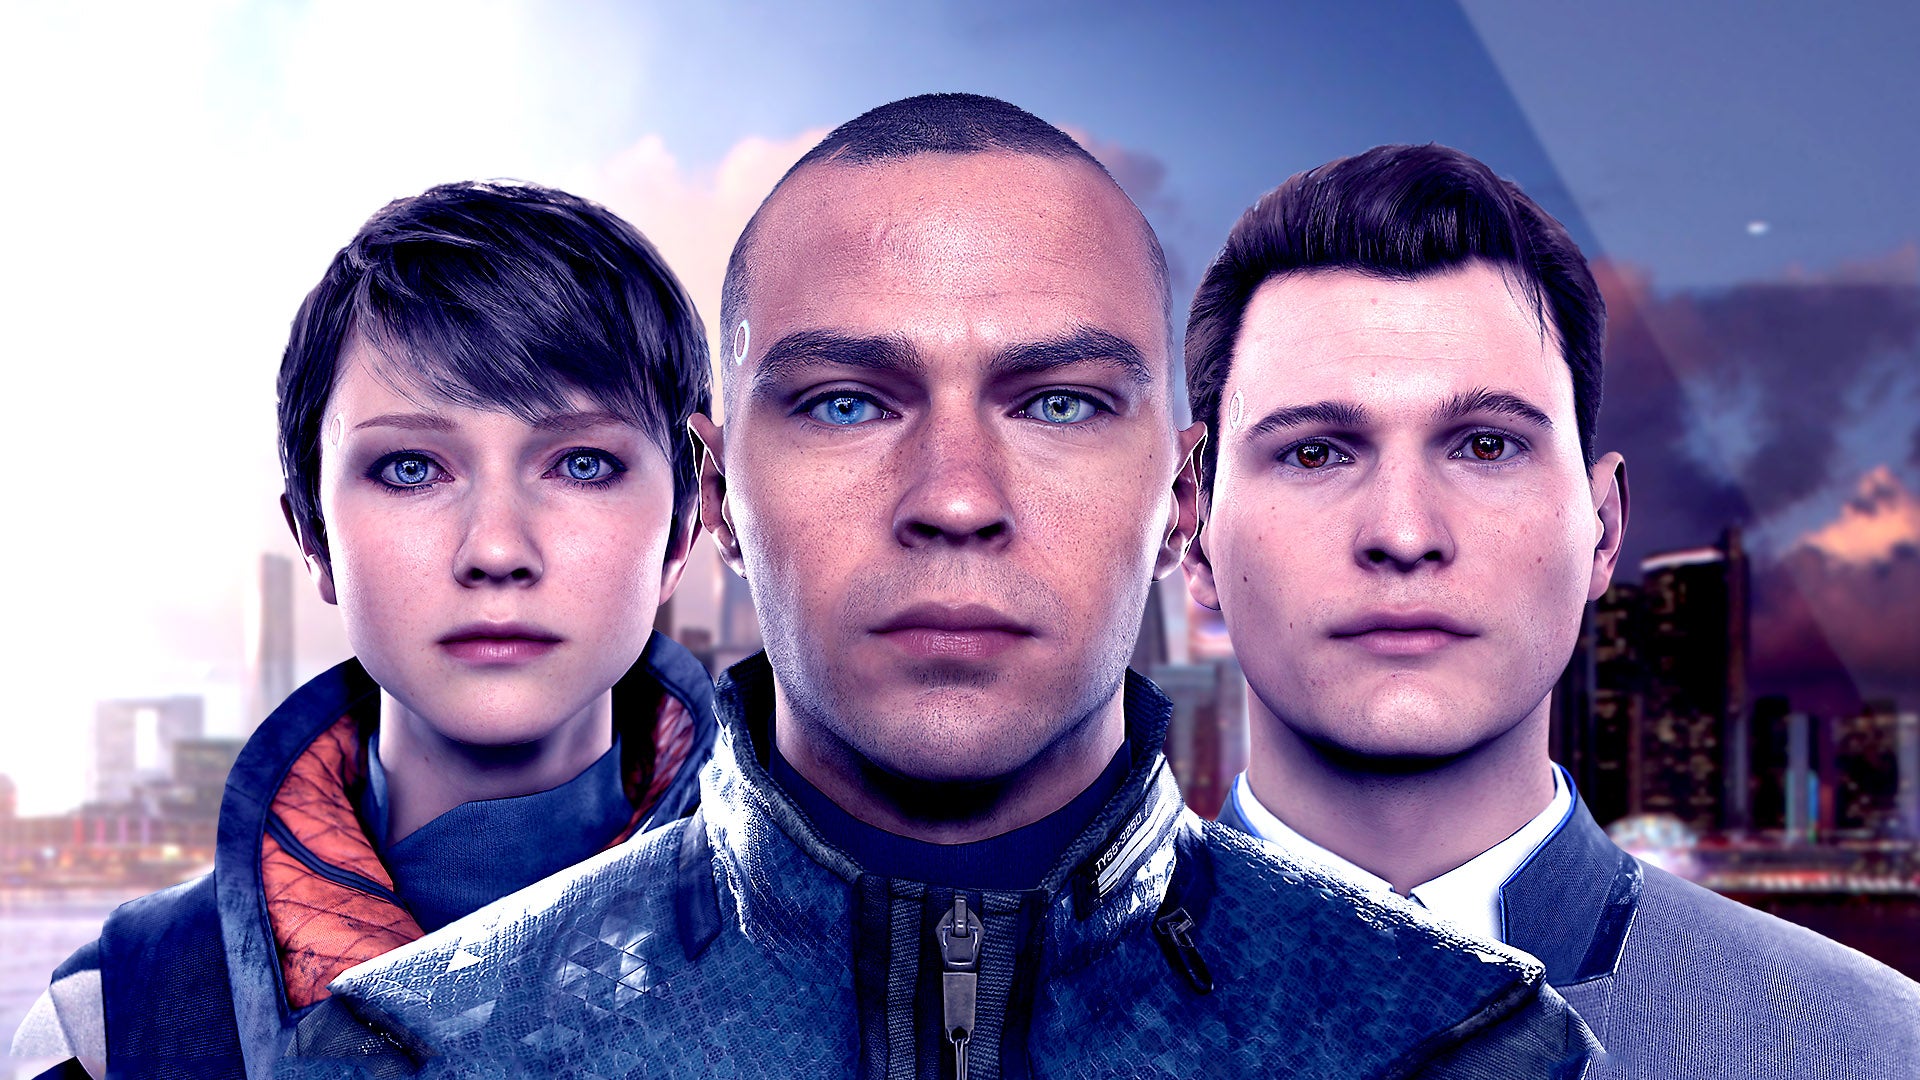 Image for Detroit Become Human PC - Native Rendering vs PS4 Pro Checkerboarding - Image Quality Analysis